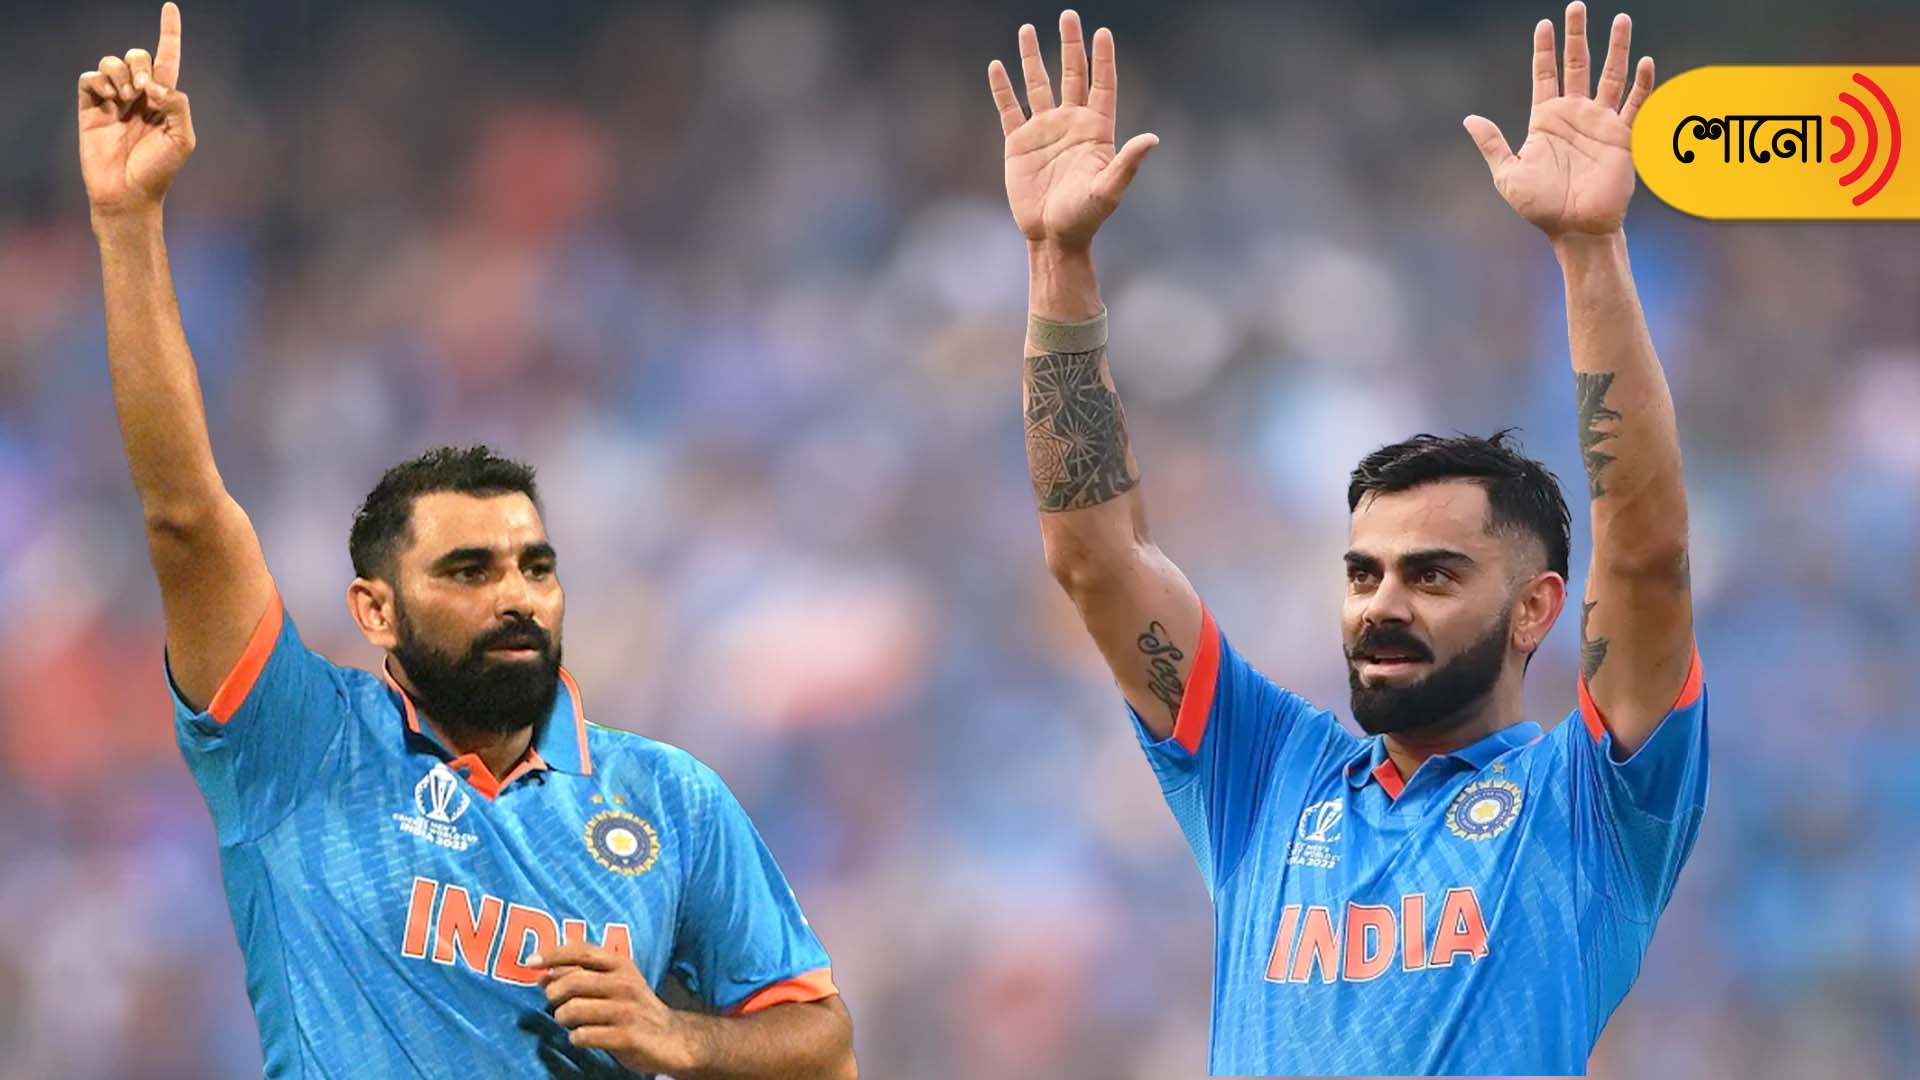 Kohli and Shami's fight reminds India not to spread hate